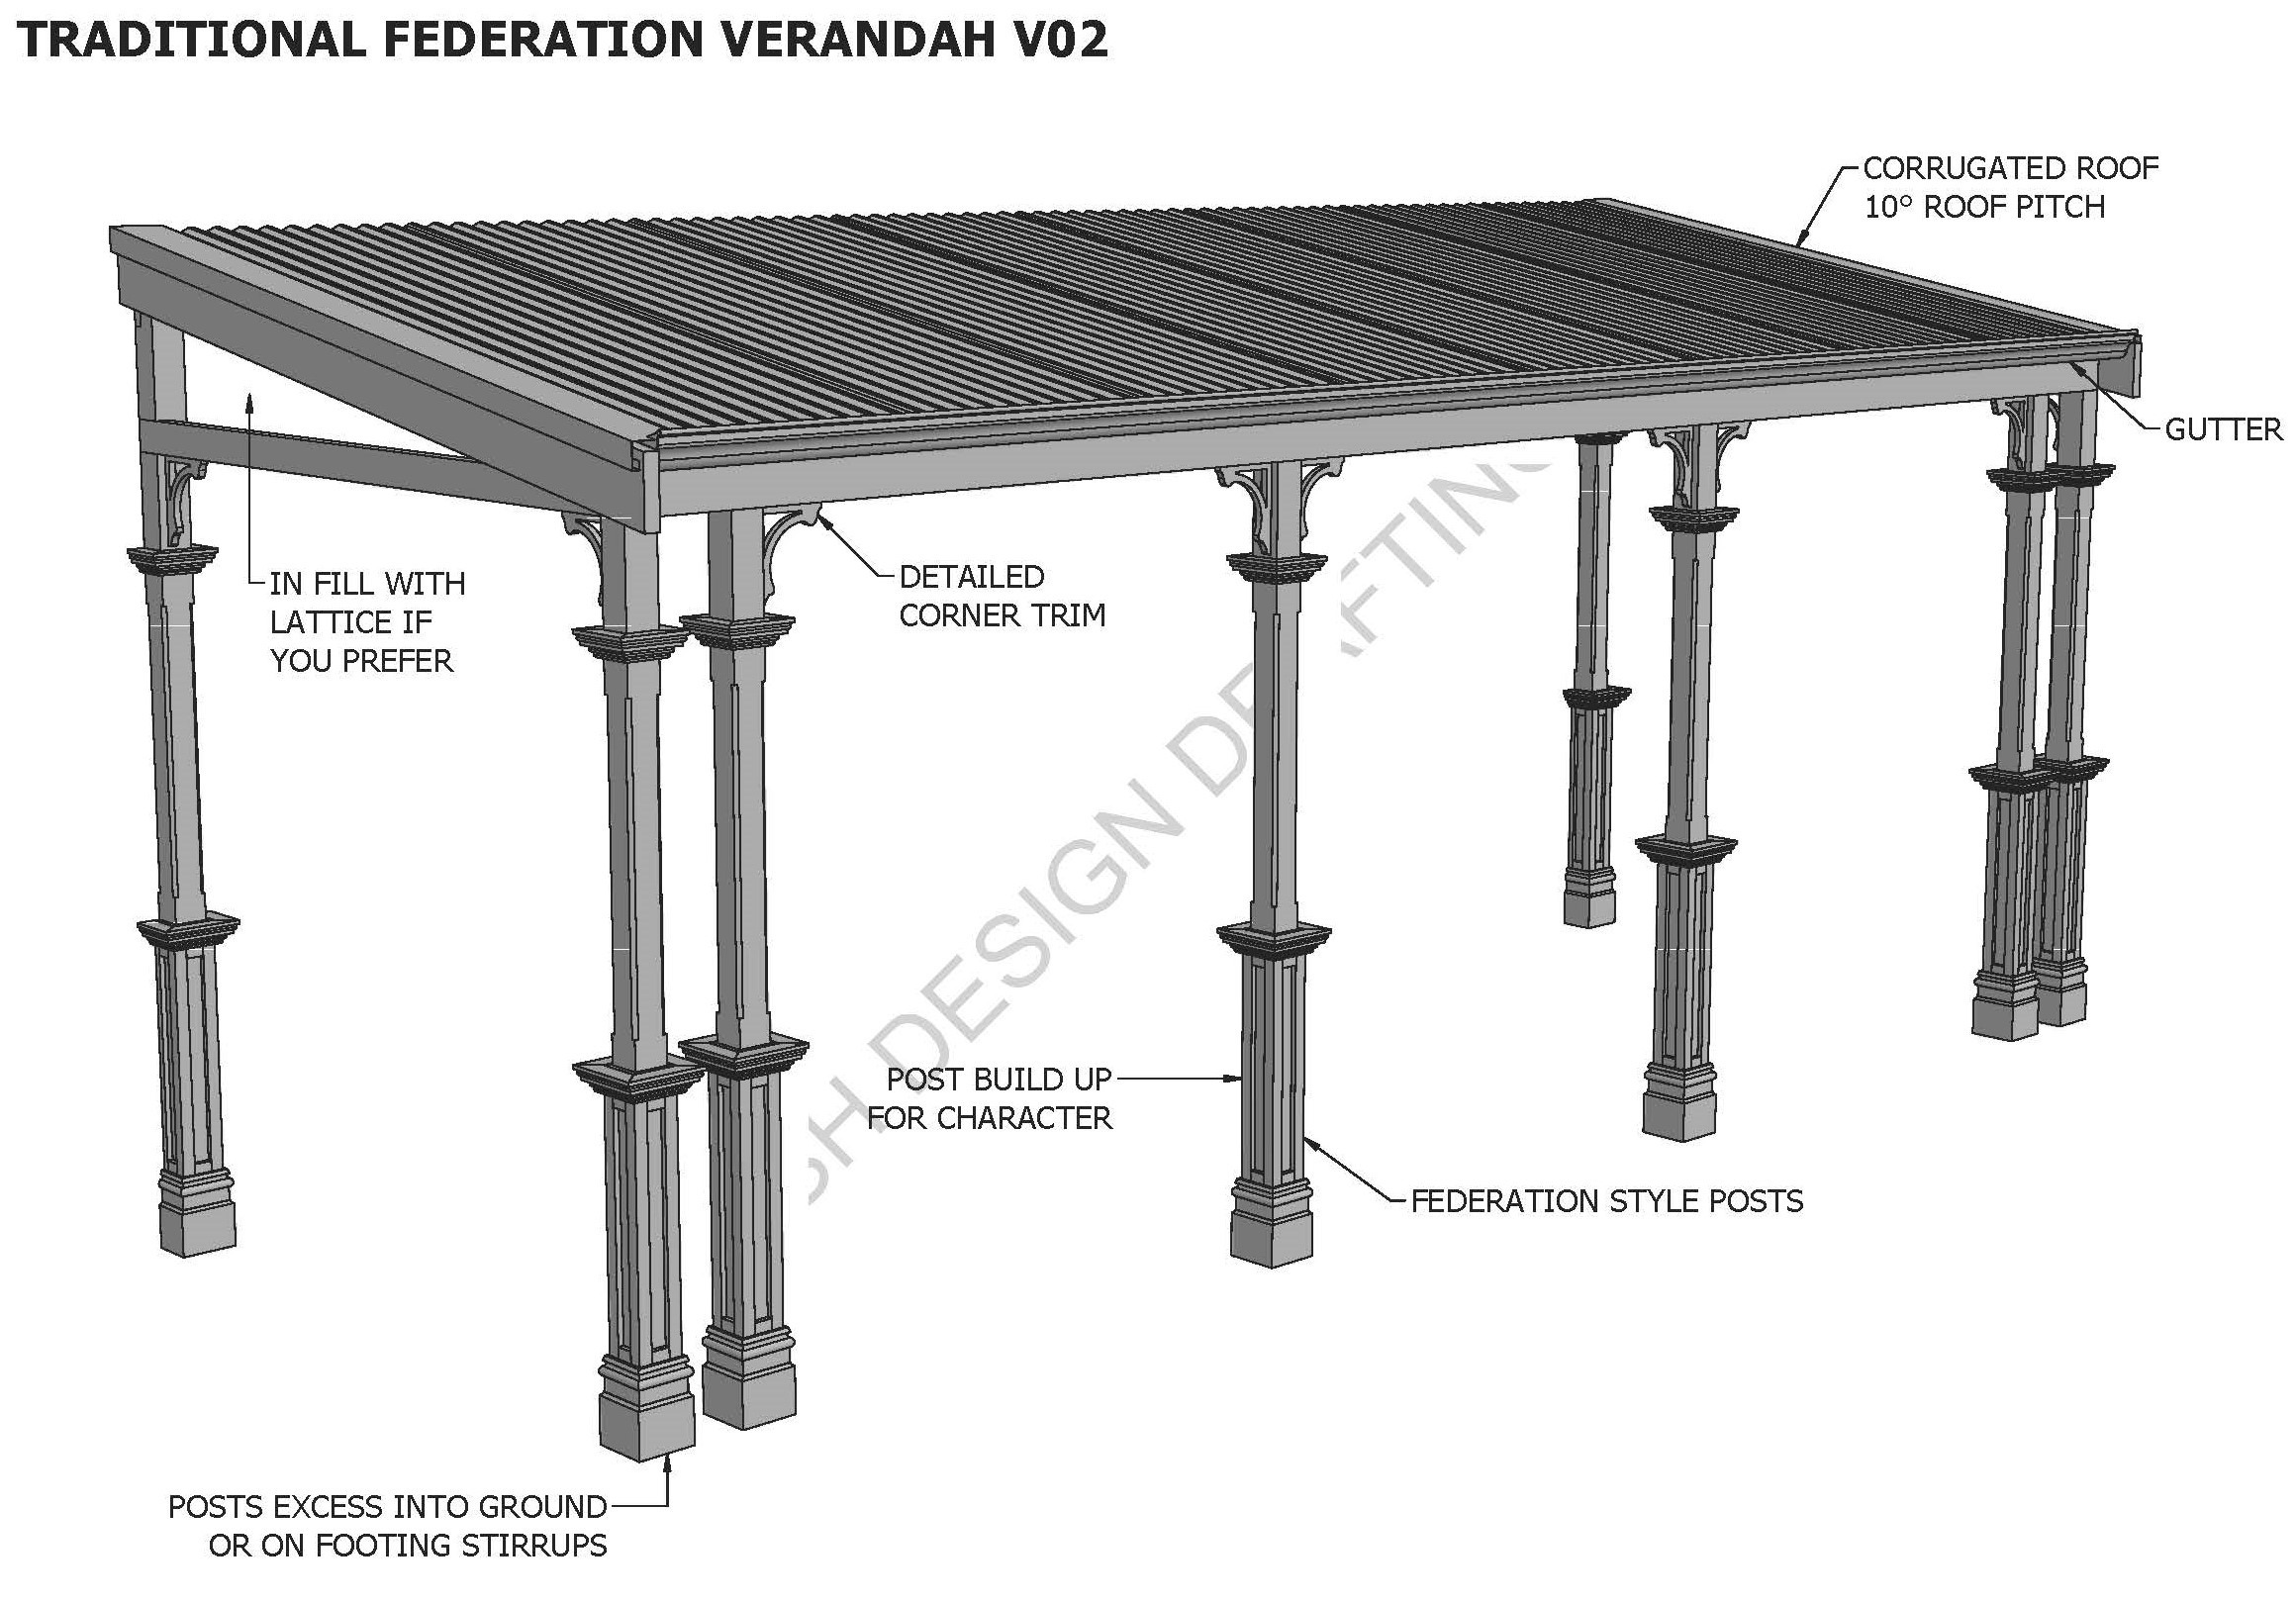 TRADITIONAL FLAT ROOF VERANDAH V02 Typical Aussie Flat Style